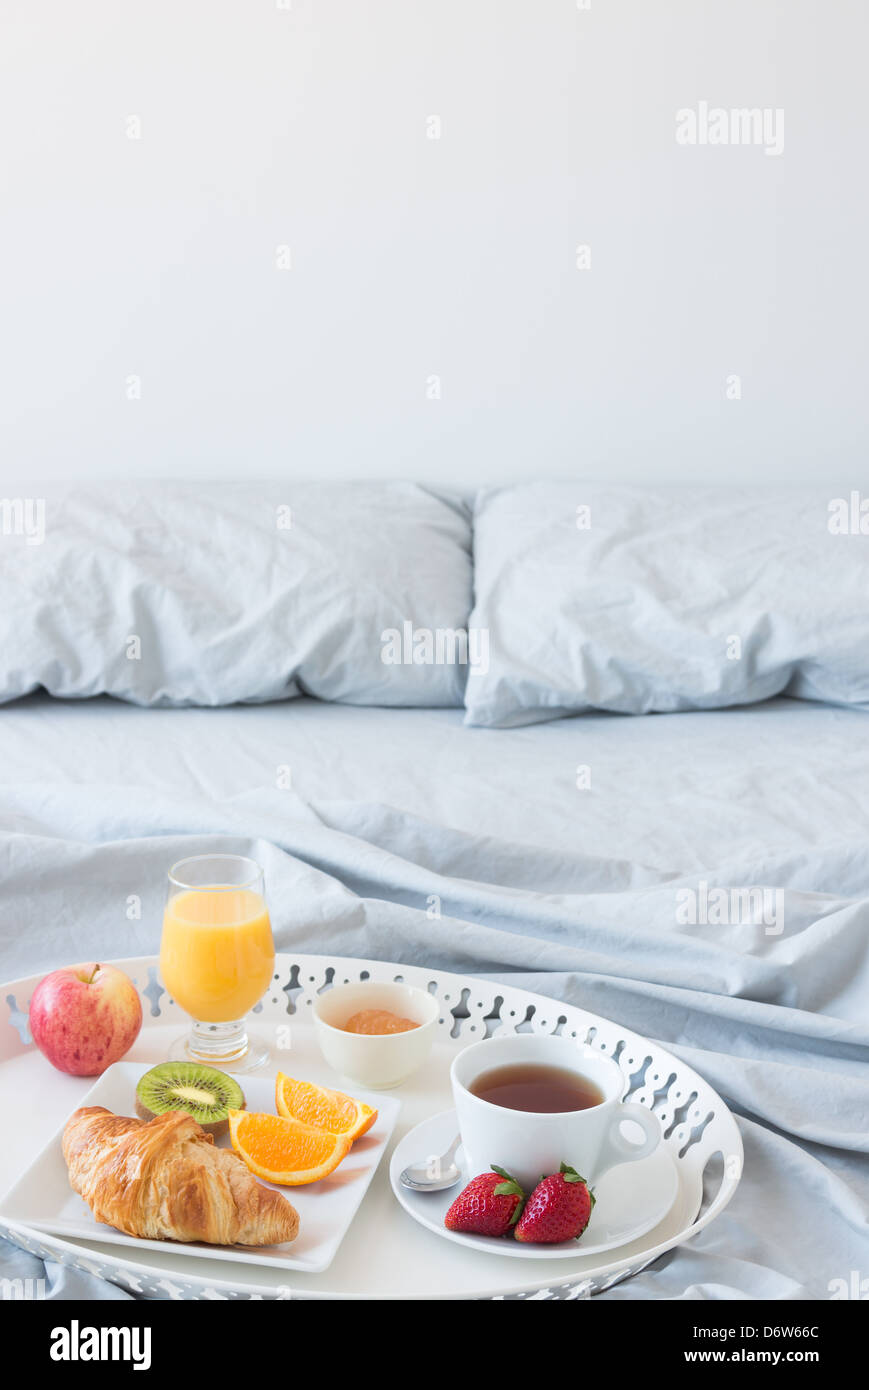 Tray with healthy breakfast on a bed with gray bed linen. Copy space. Stock Photo